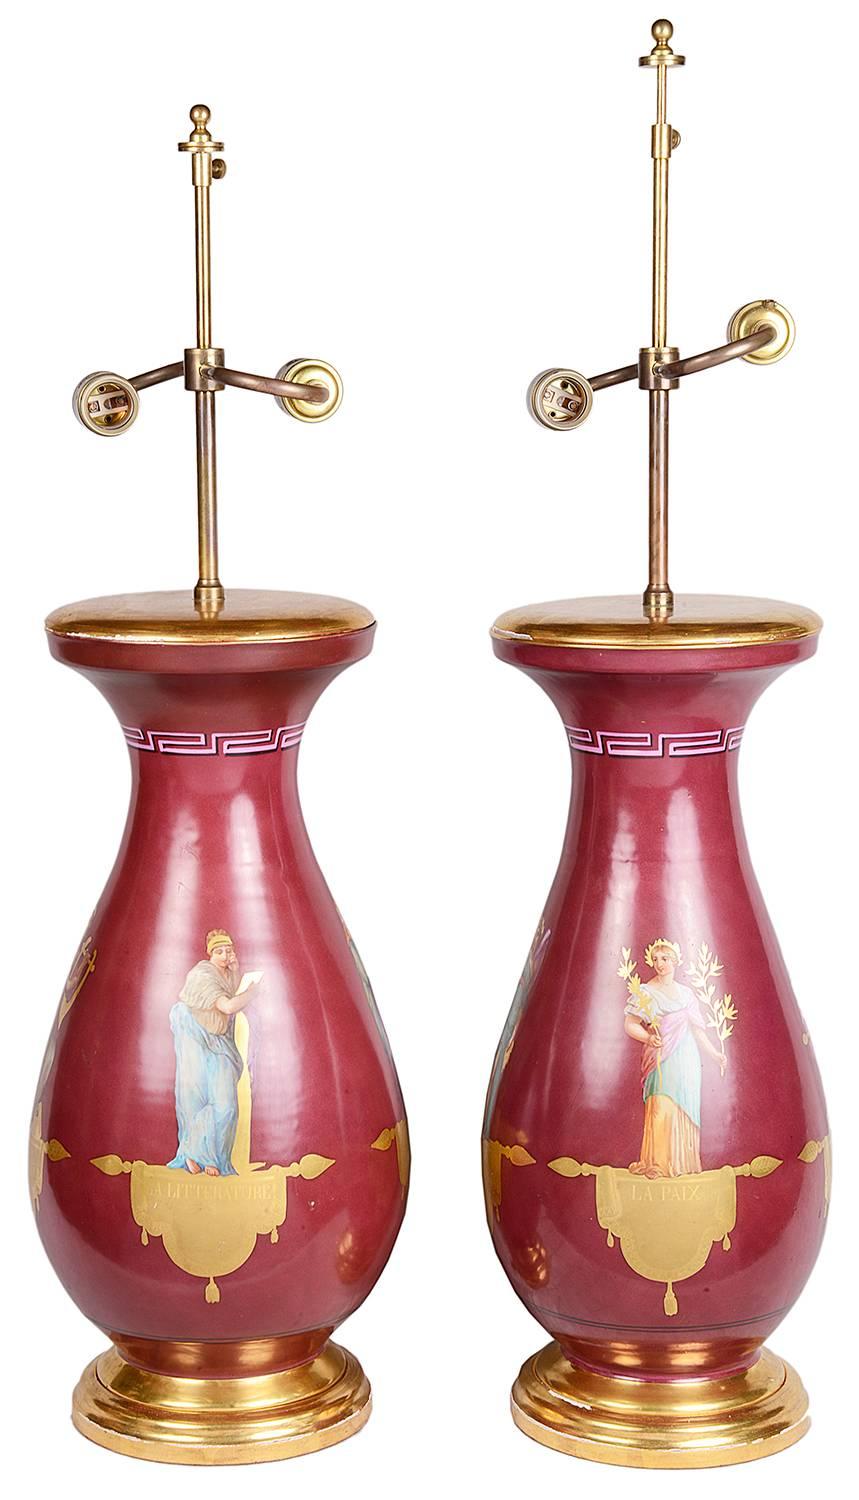 A very good quality pair of 19th century Paris porcelain vases or lamps. Each depicting classical Roman figures with a burgundy ground.